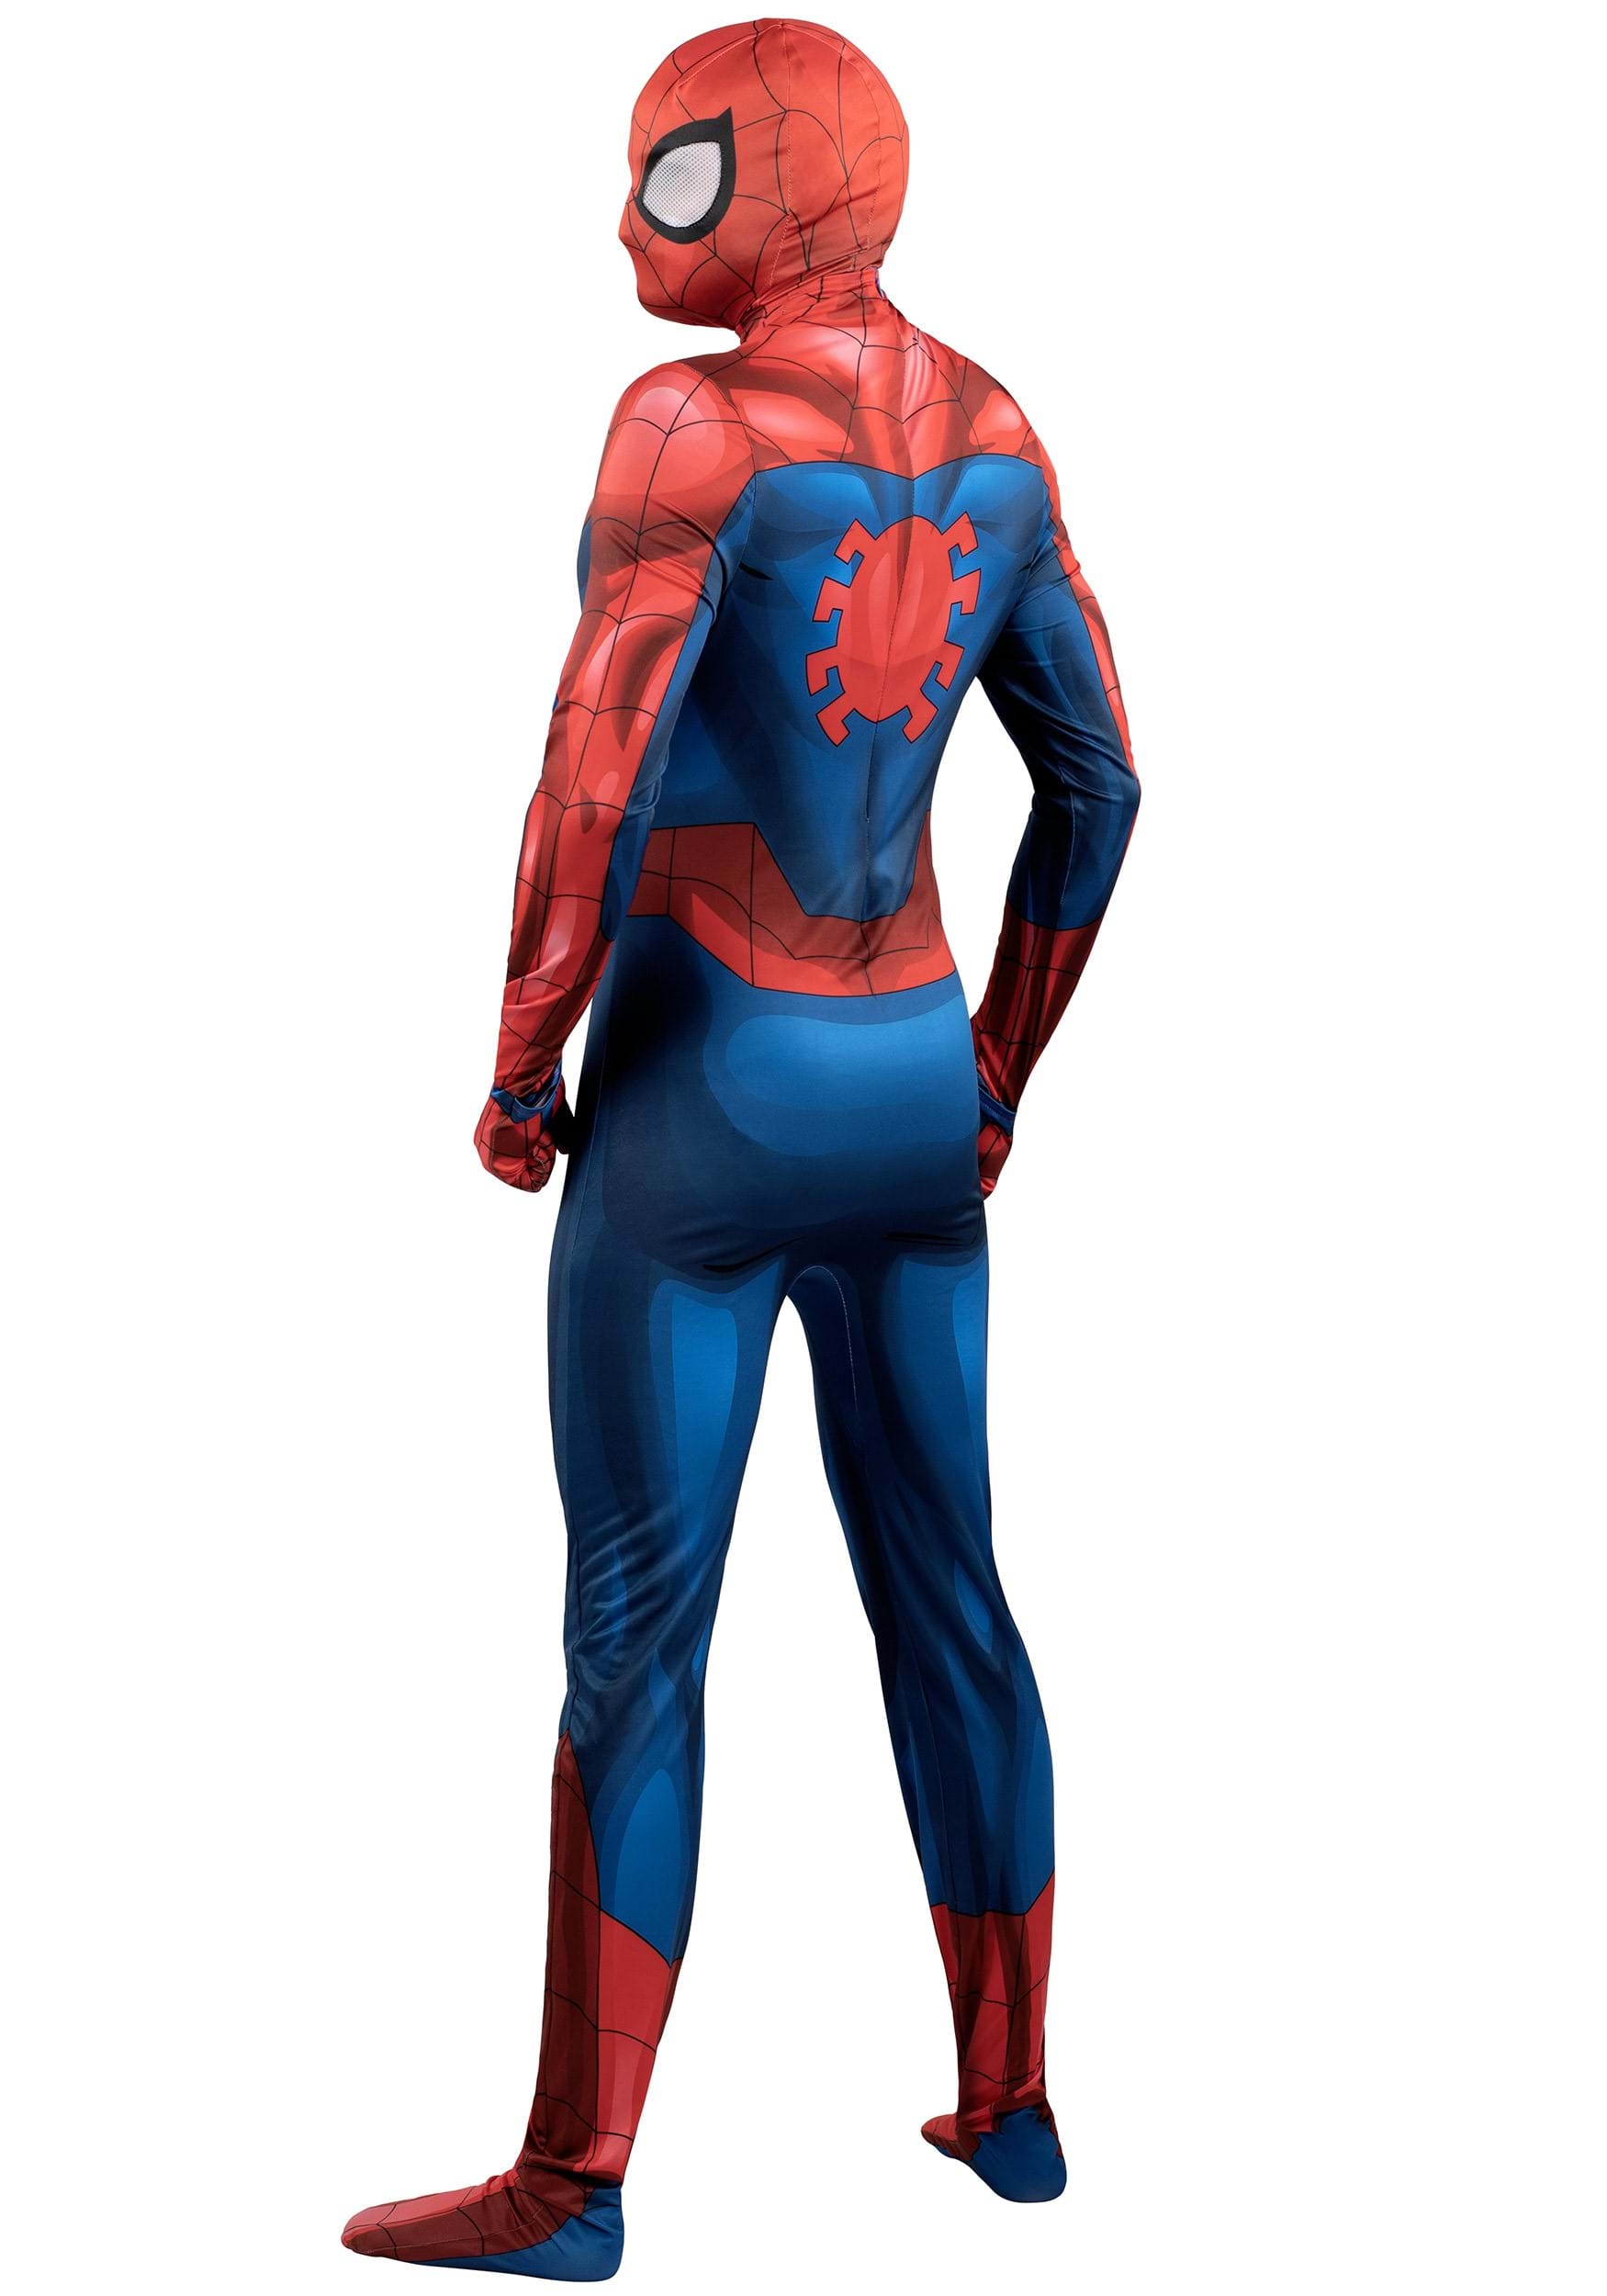 MARVEL ADULT DELUXE SPIDER-MAN ZENTAI SUIT - The Toy Book